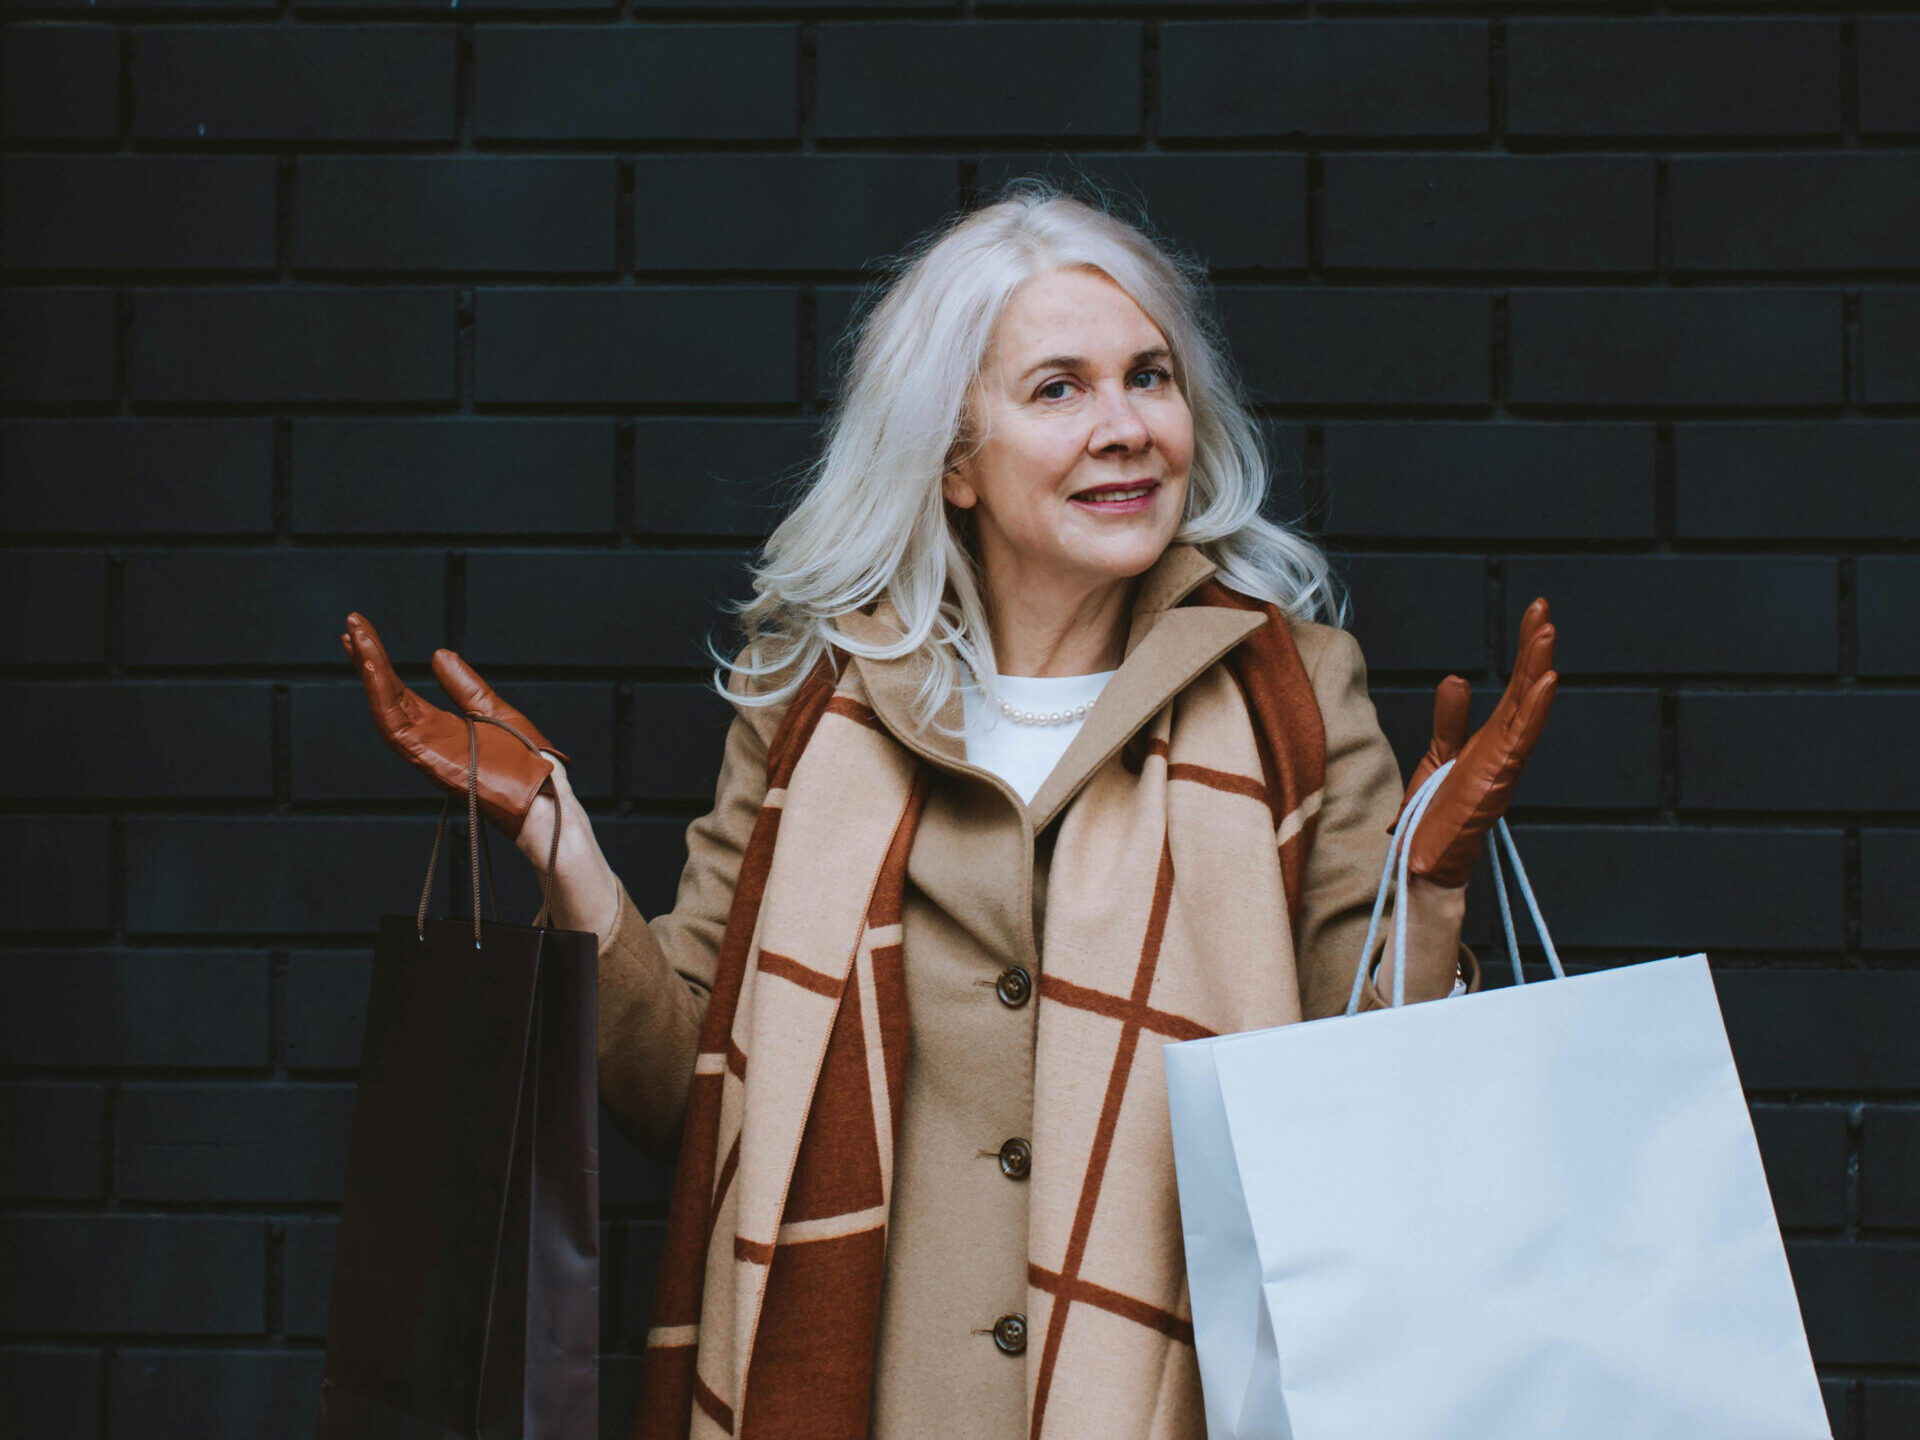 woman with white hair, wearing gloves and winter coat holding shopping bag in front of gray brick wall